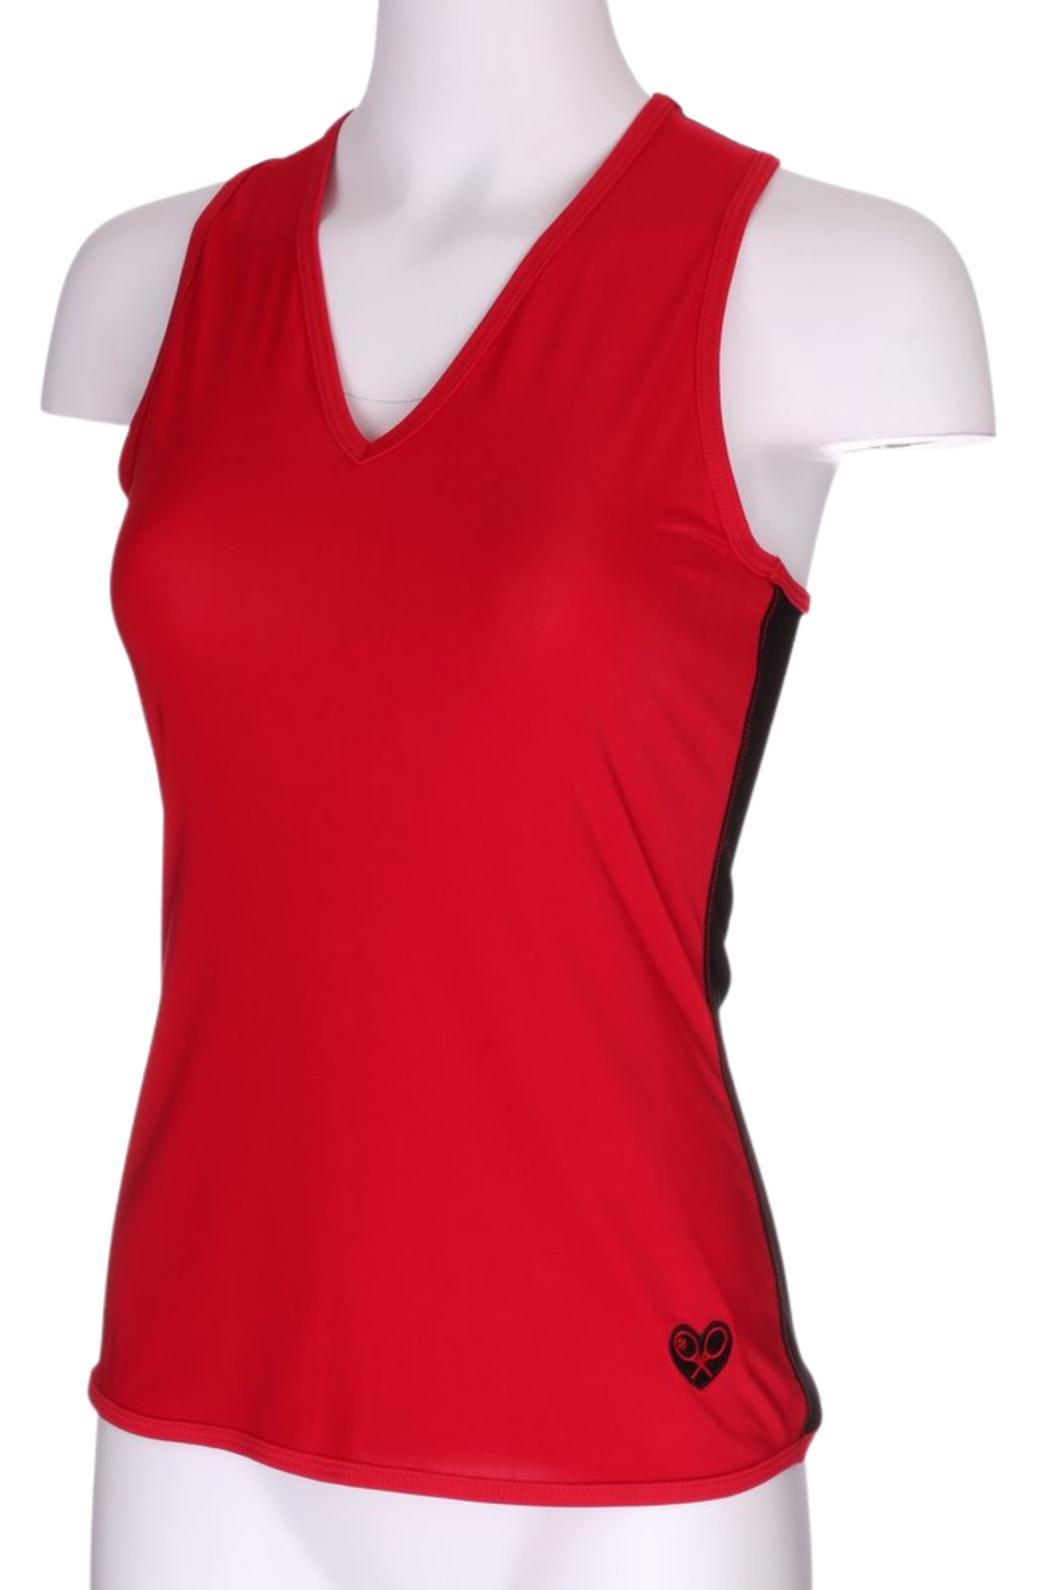 Red Vee Tank with Plain Solid Black Back - I LOVE MY DOUBLES PARTNER!!!